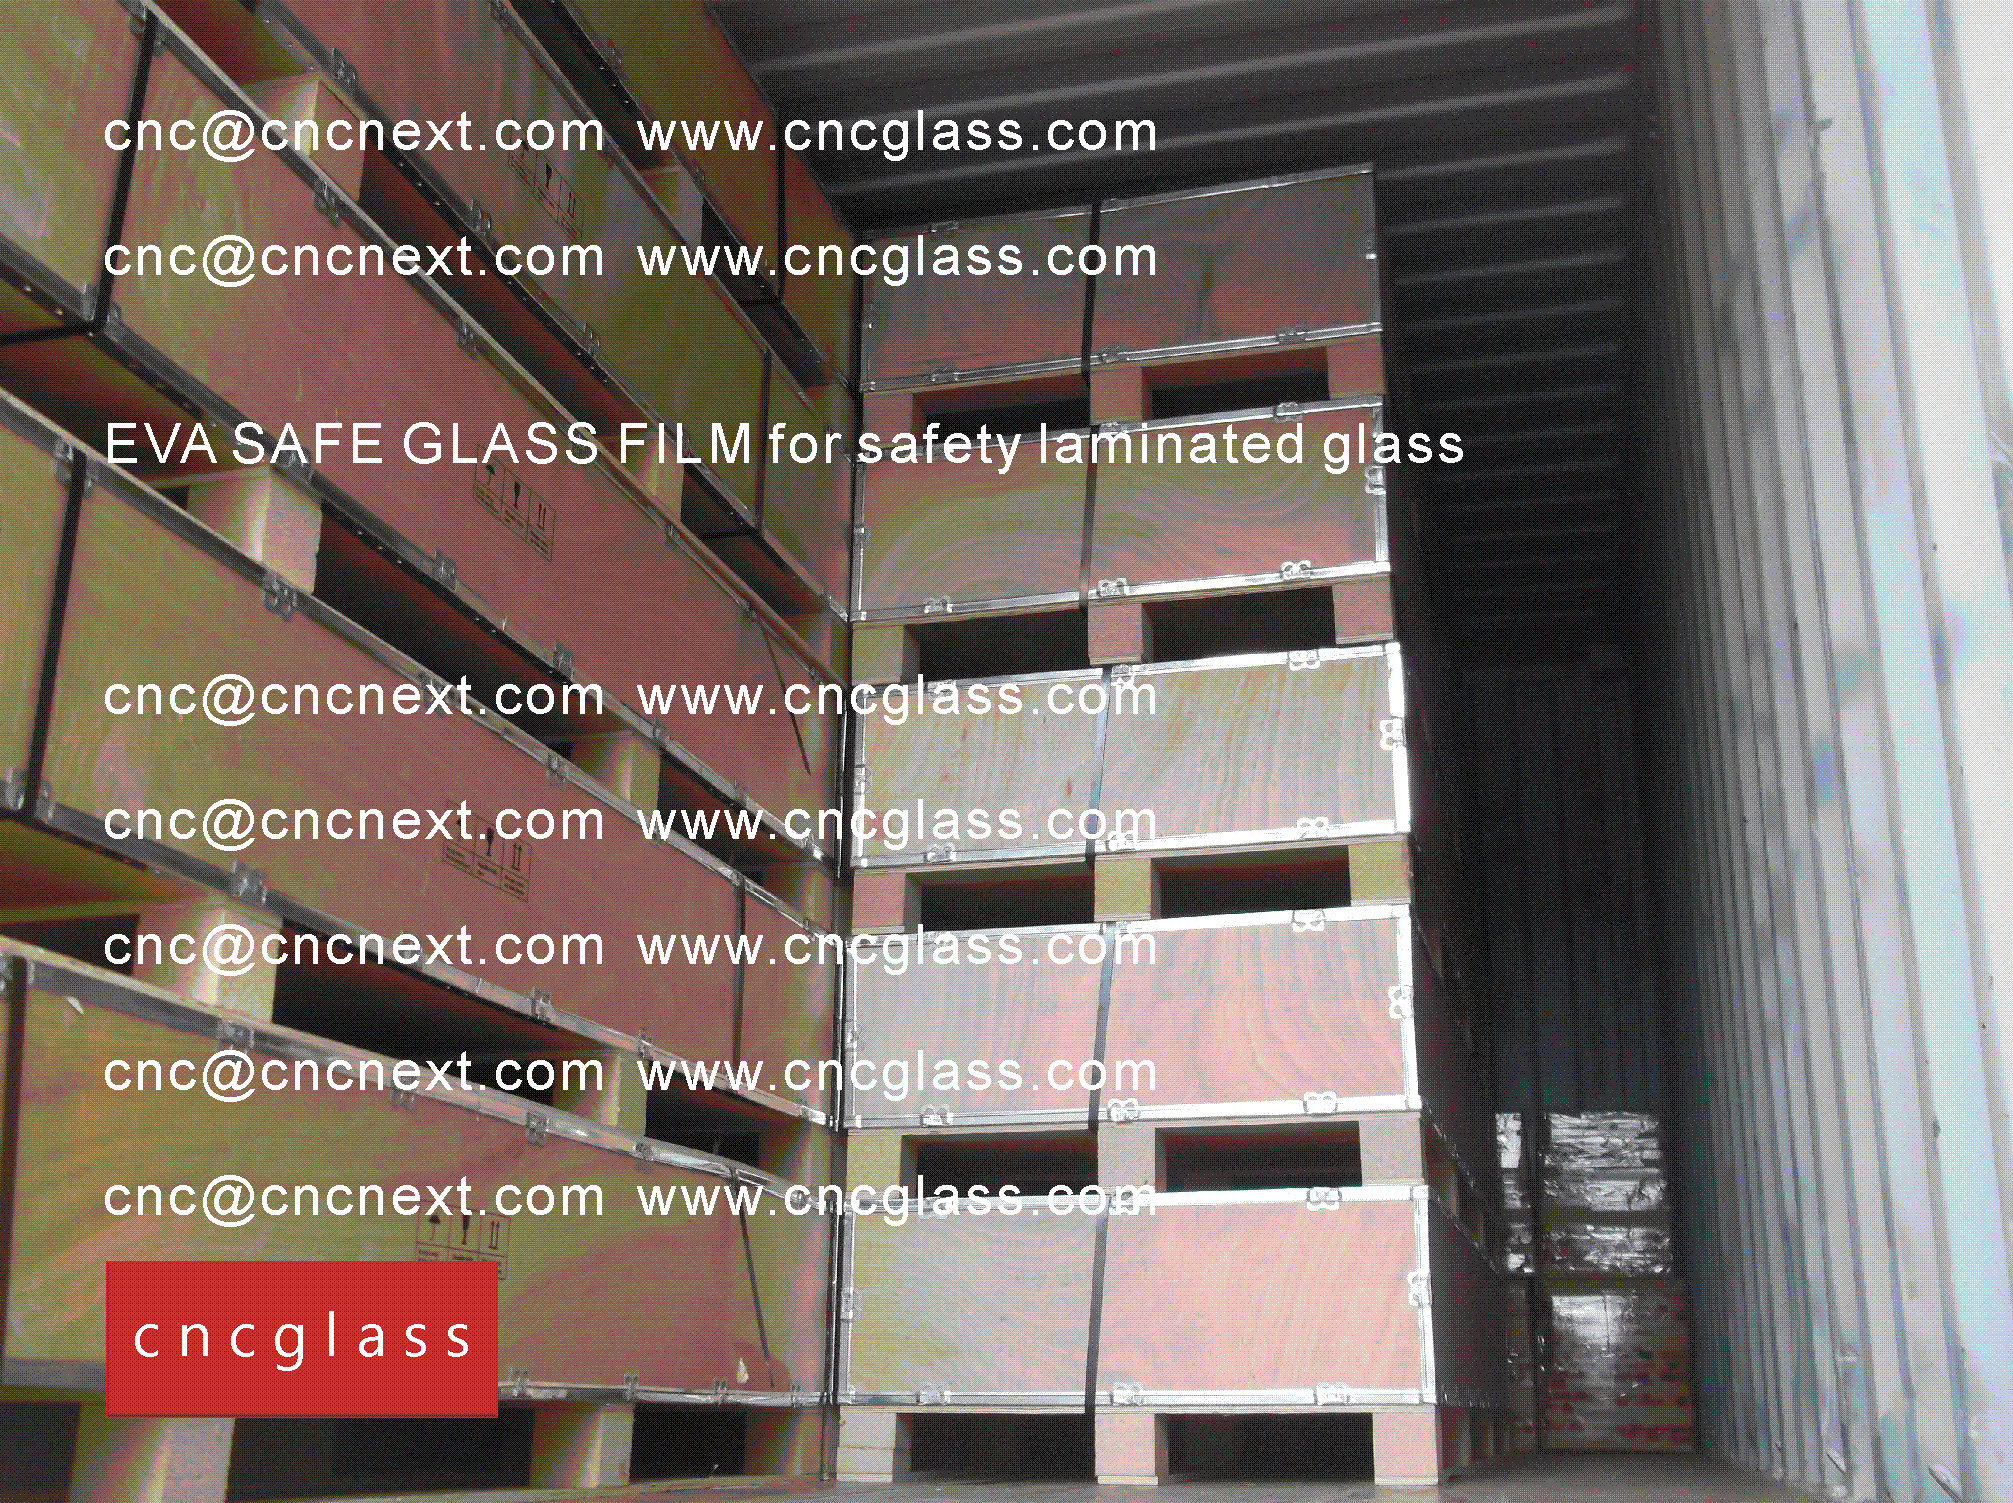 004 EVA SAFE GLASS FILM LOADING CONTAINER (SAFETY LAMINATED GLASS)